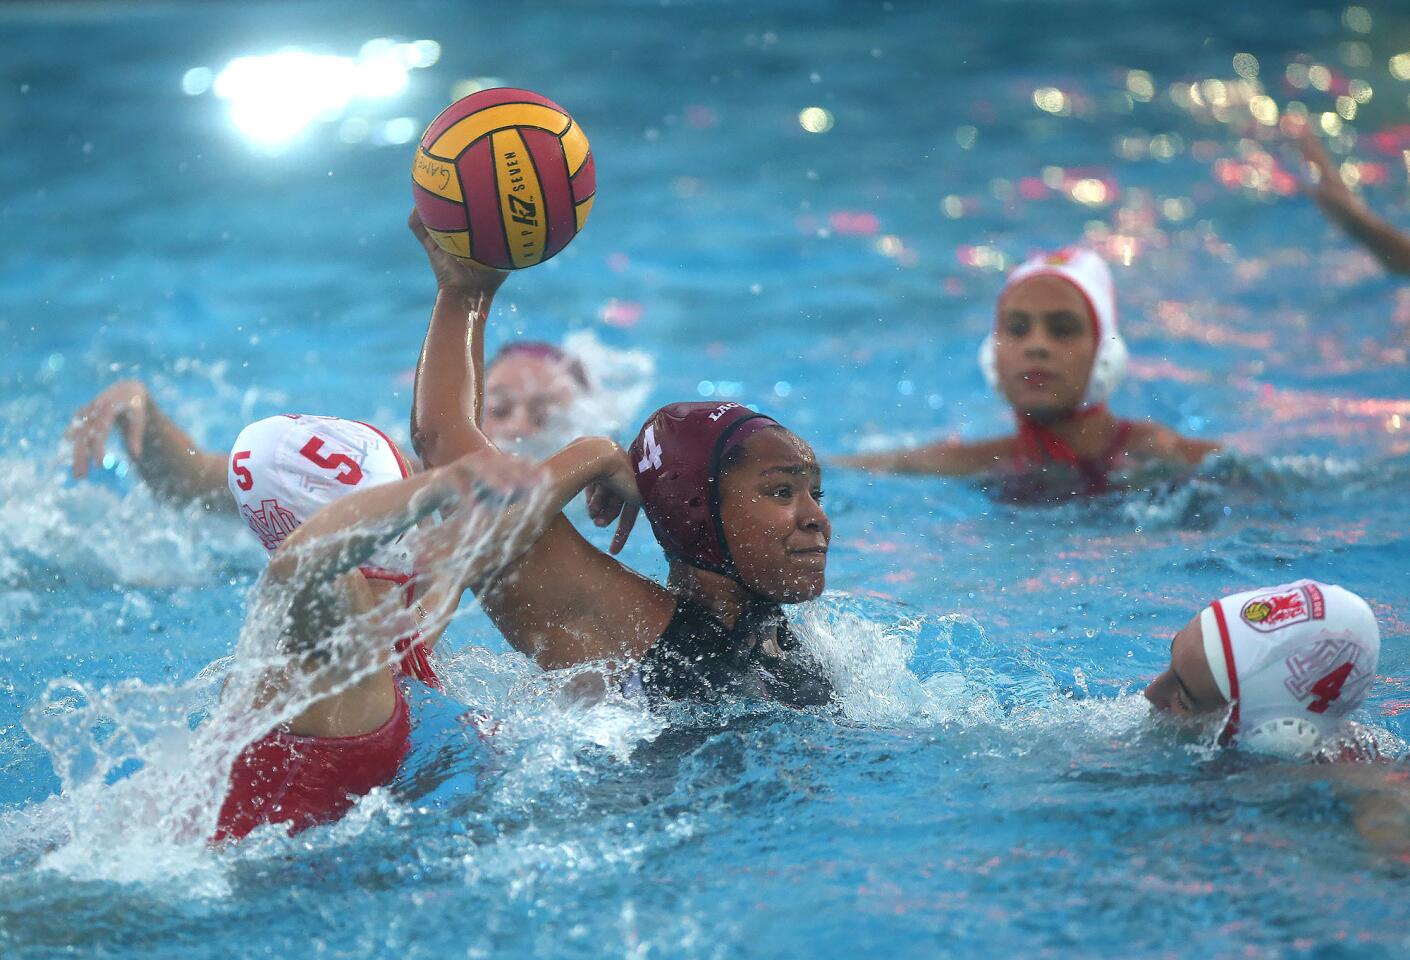 Imani Clemons (4) shoots under pressure during Laguna Beach High's nonleague water polo game against visiting Mater Dei on Friday.